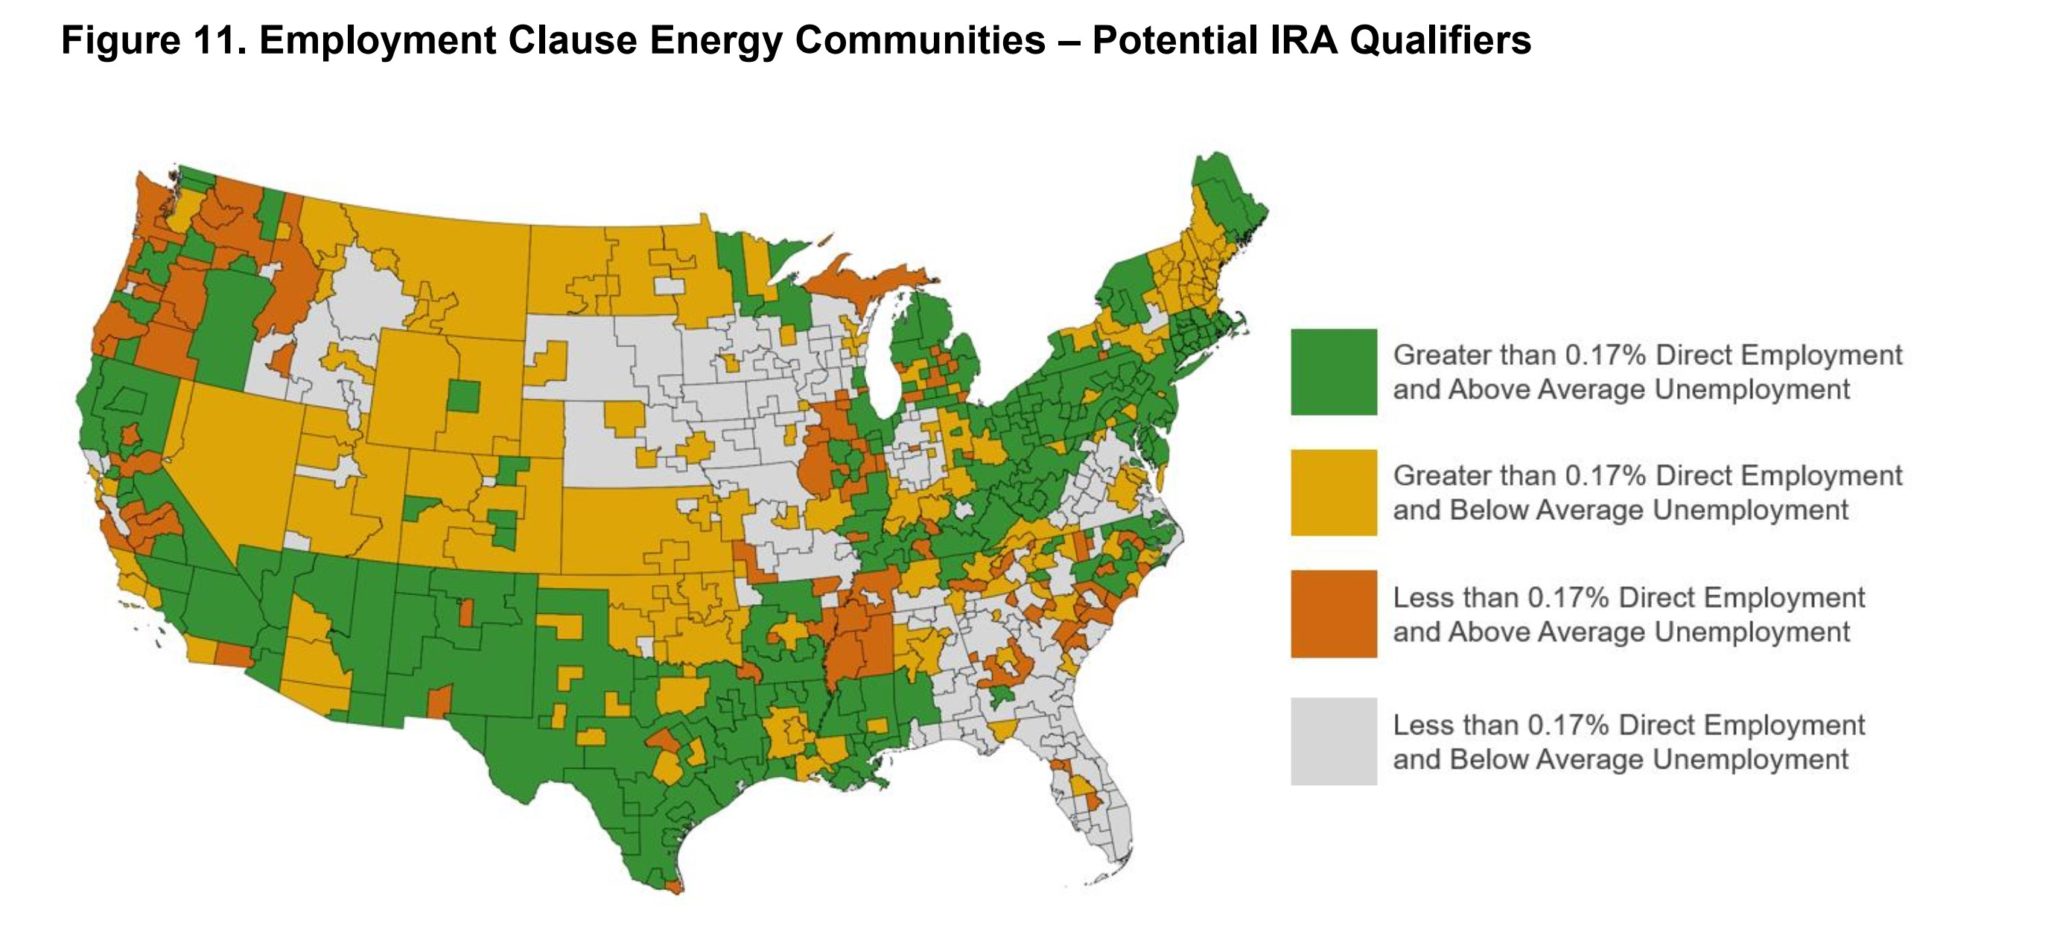 Inside the IRA Updated Energy Community maps and questions from